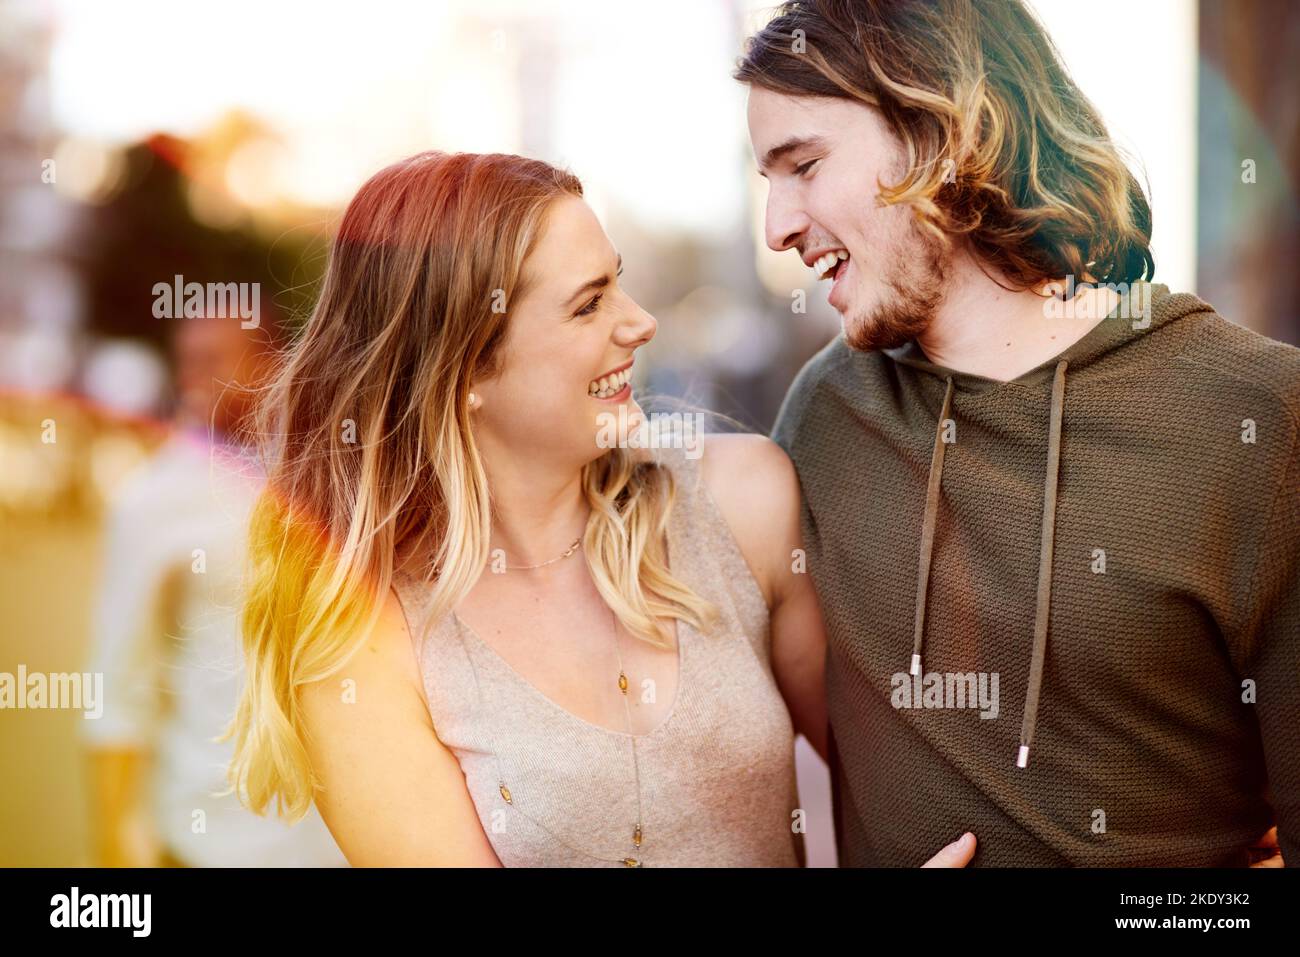 I love you more. a happy young couple taking a walk through the city. Stock Photo